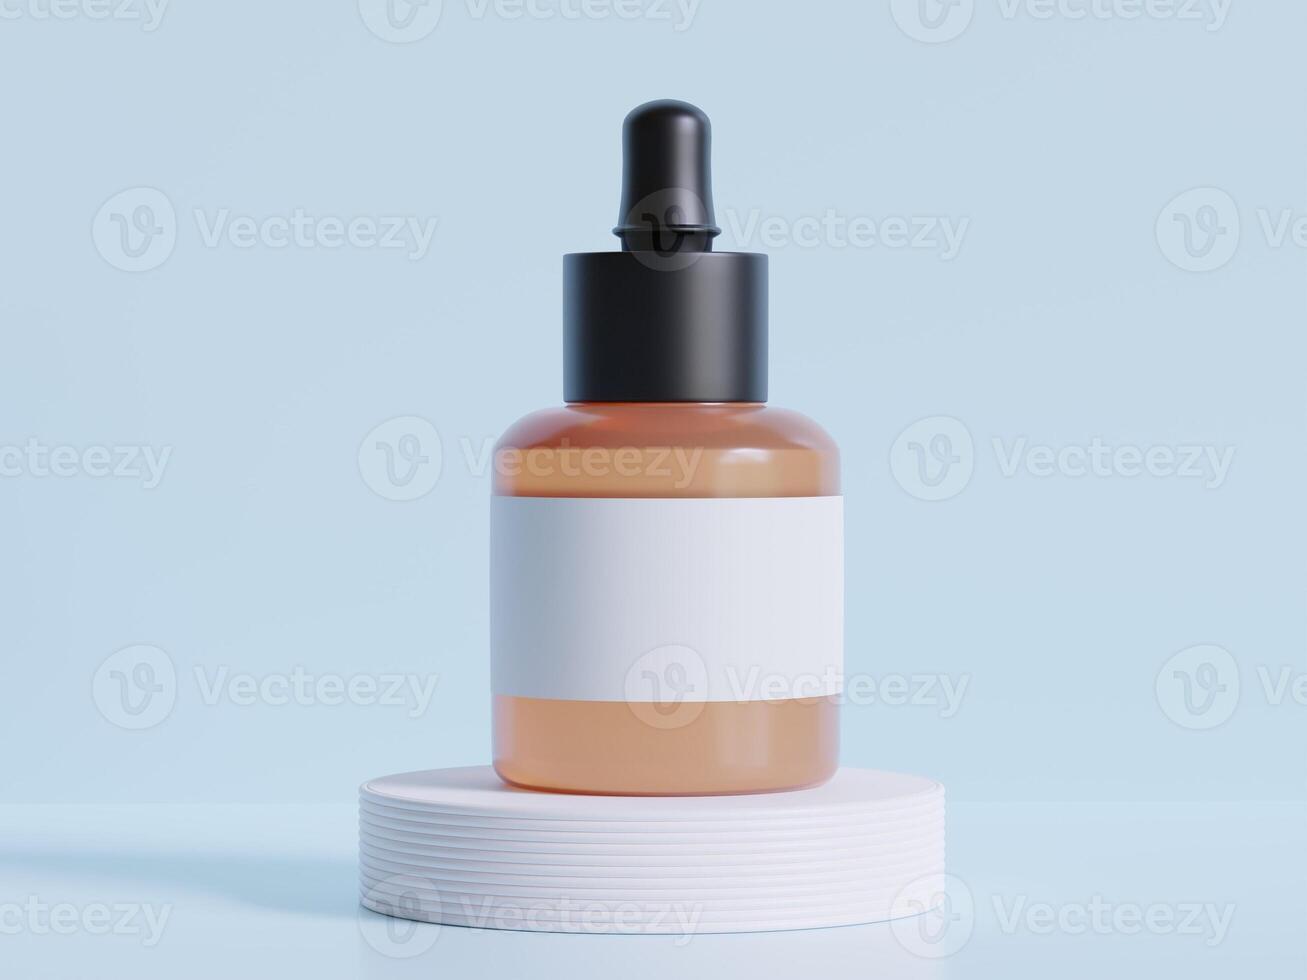 Realistic cosmetic bottle. Beauty product container set, plastic bottle illustration blank. spray bottle, cream tube and jar mockup collection on the podiun 3D. Clear spa hygiene object photo